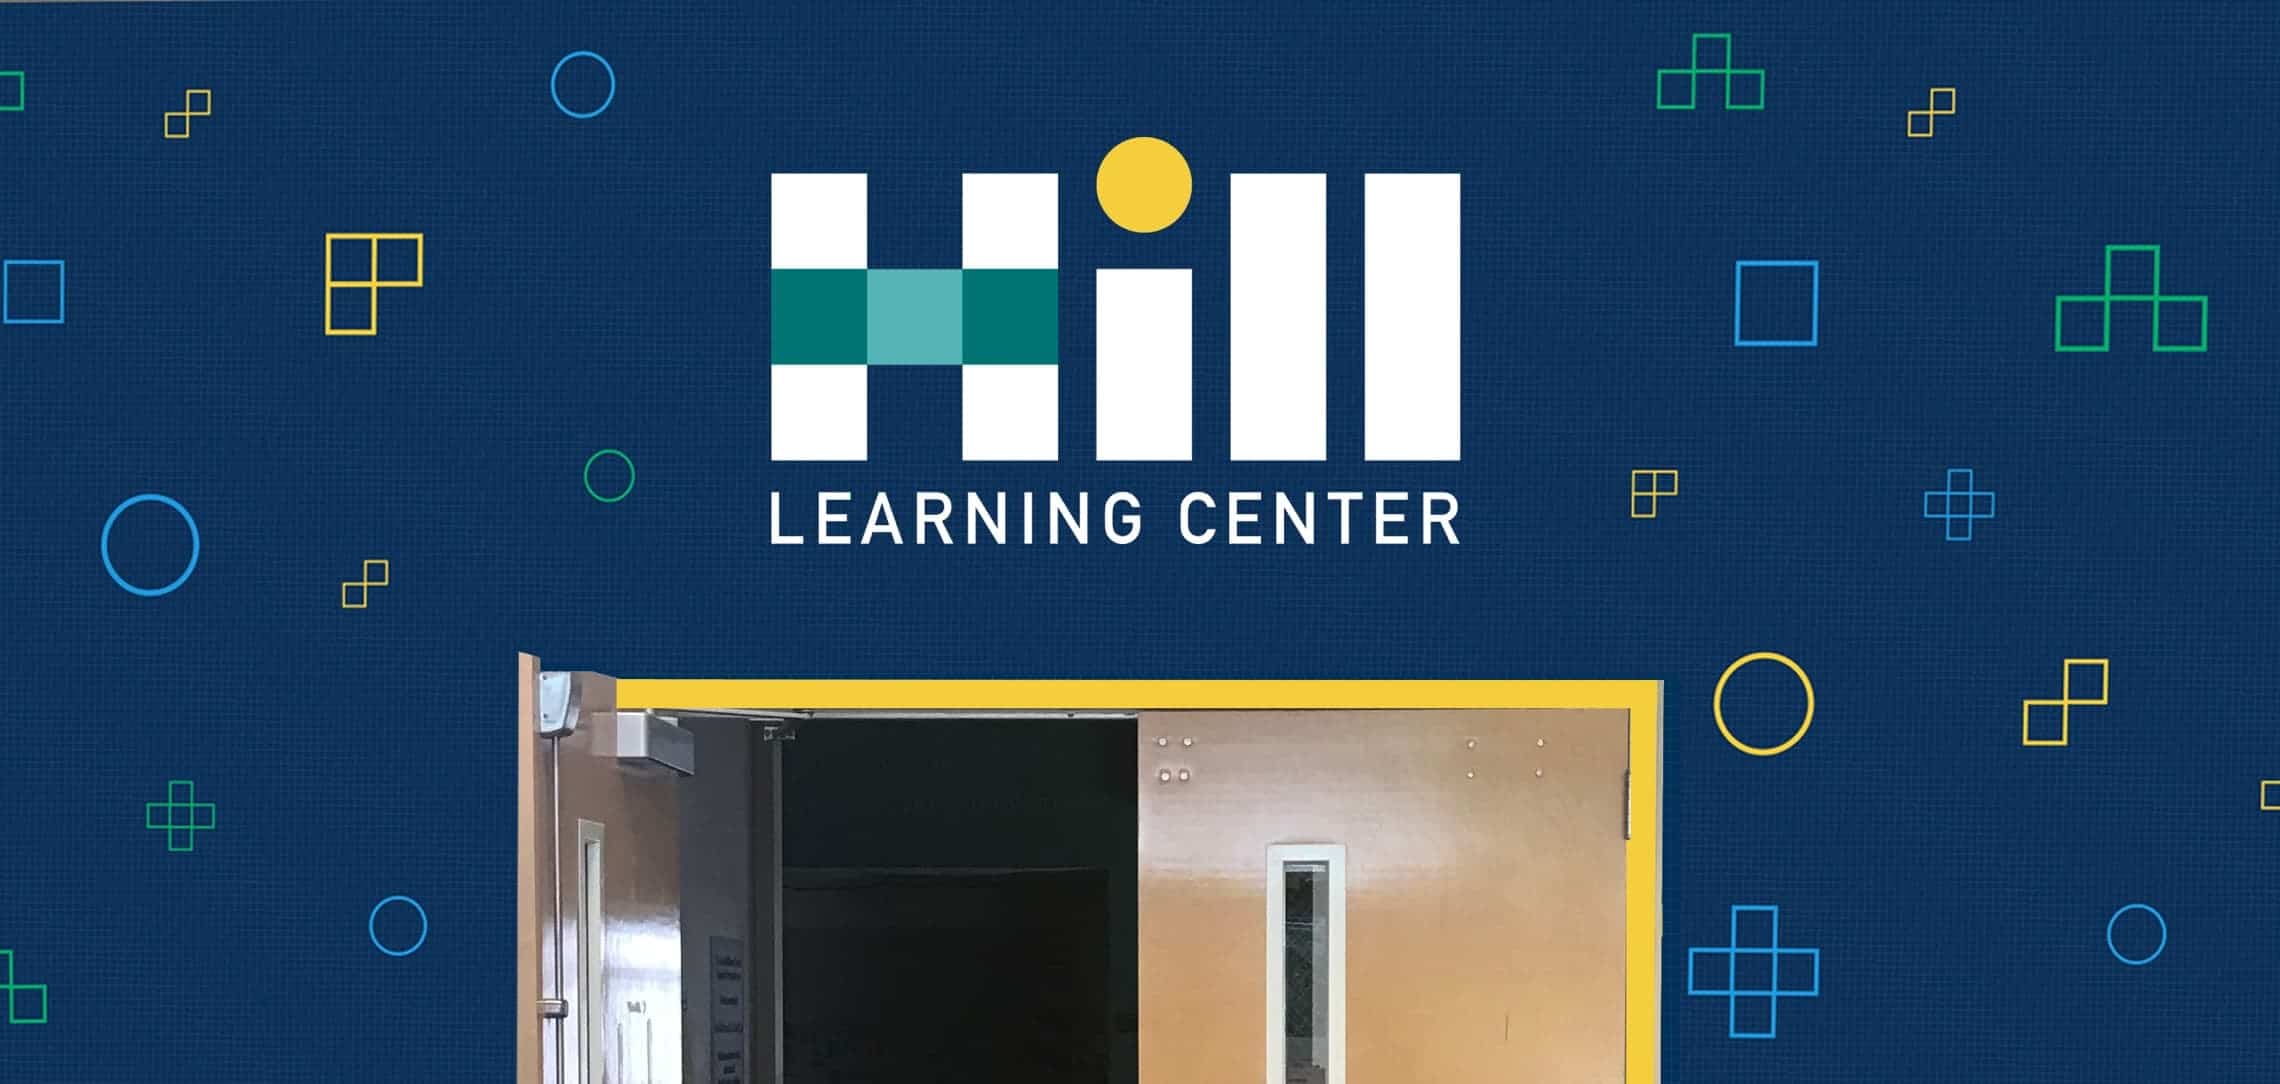 Hill Learning Center hall sign